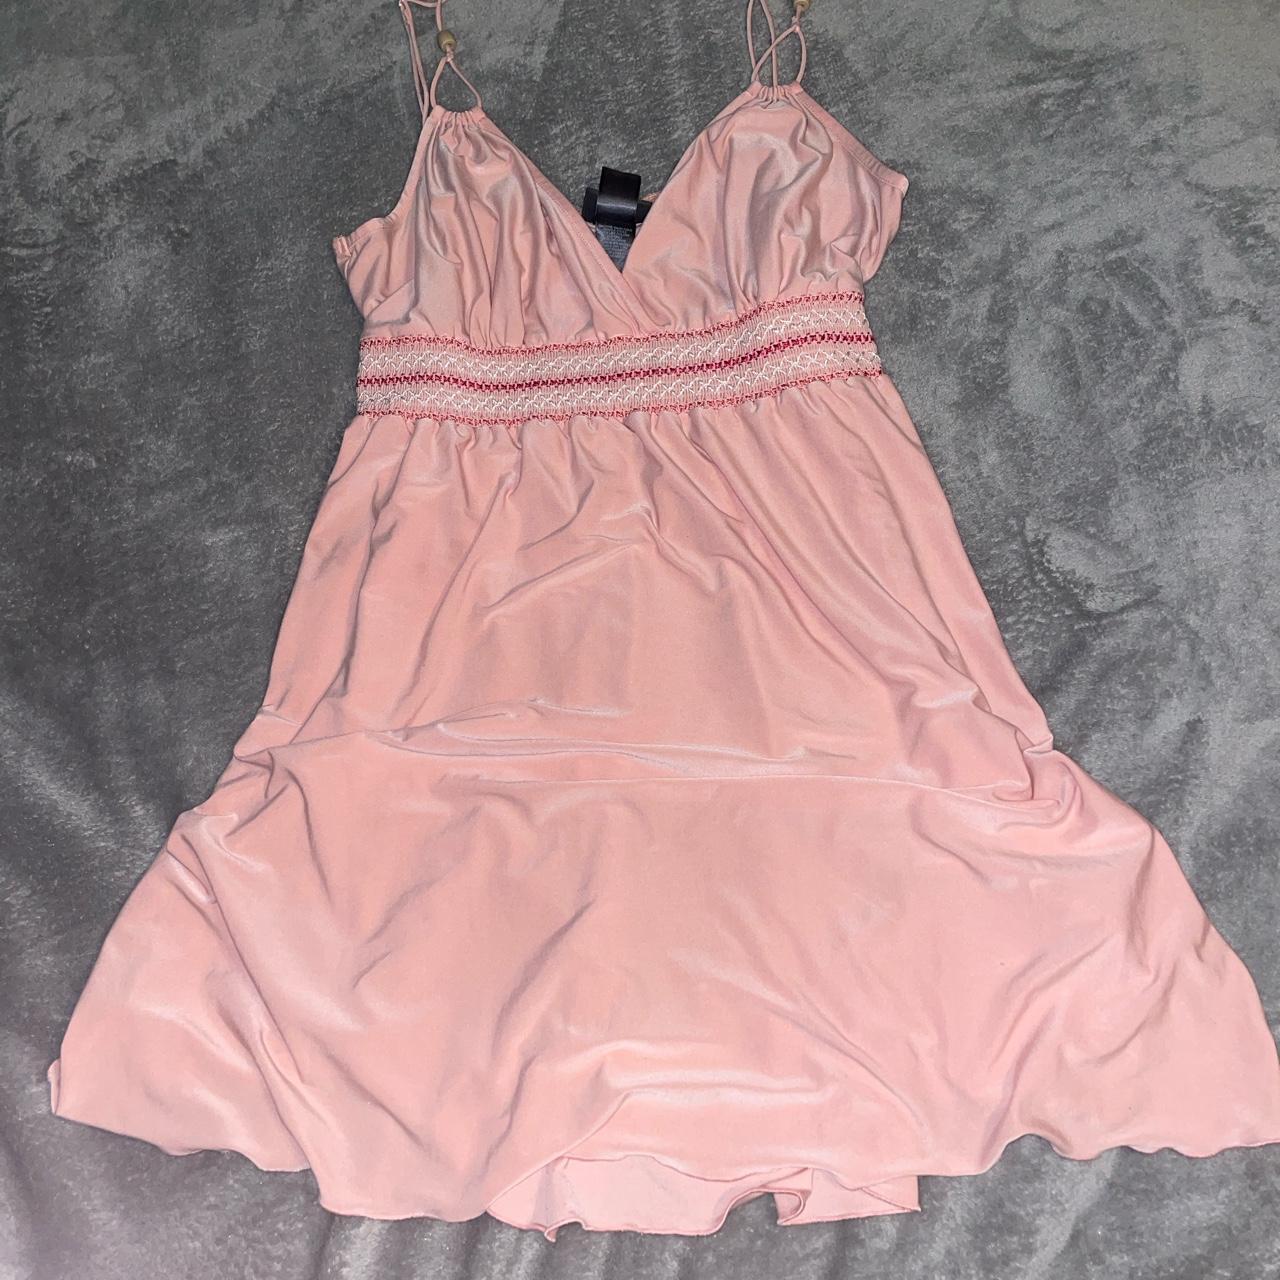 item listed by coolgirly2k